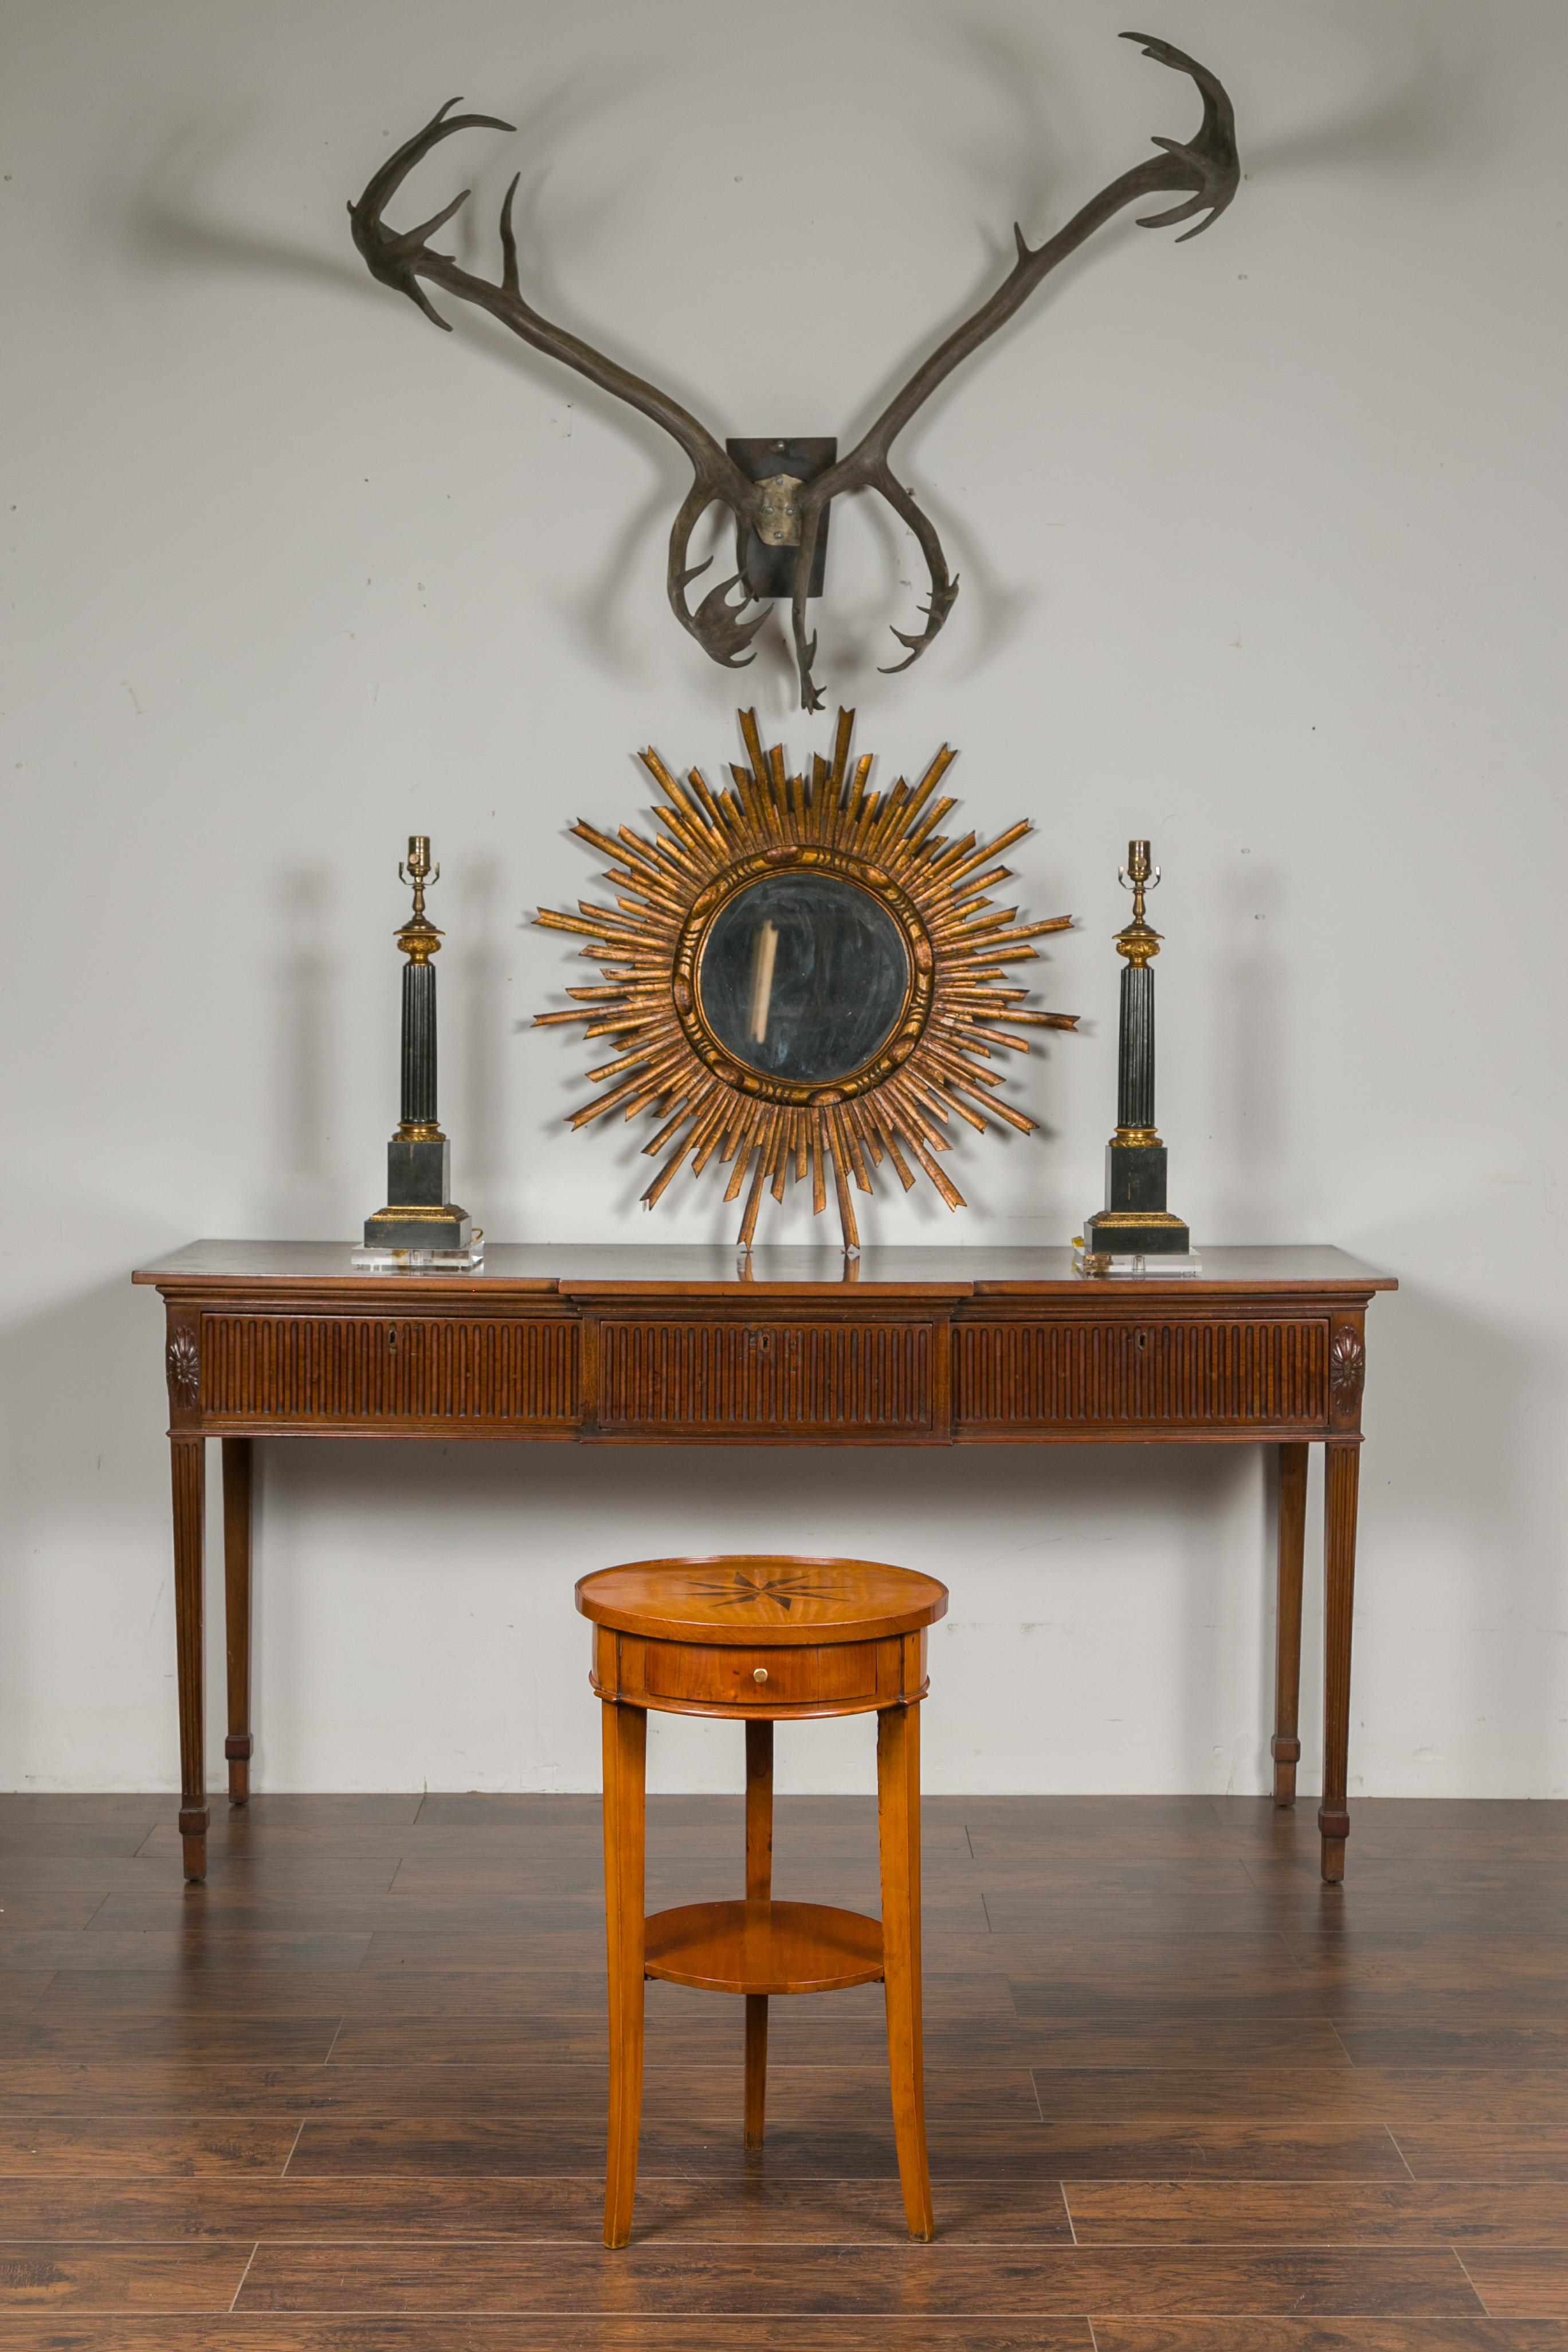 An Italian walnut guéridon table from the mid-19th century, with star marquetry, single drawer and lower shelf. Created in Italy during the 1850s, this side table features a circular top with slightly raised edges, adorned in its center with a